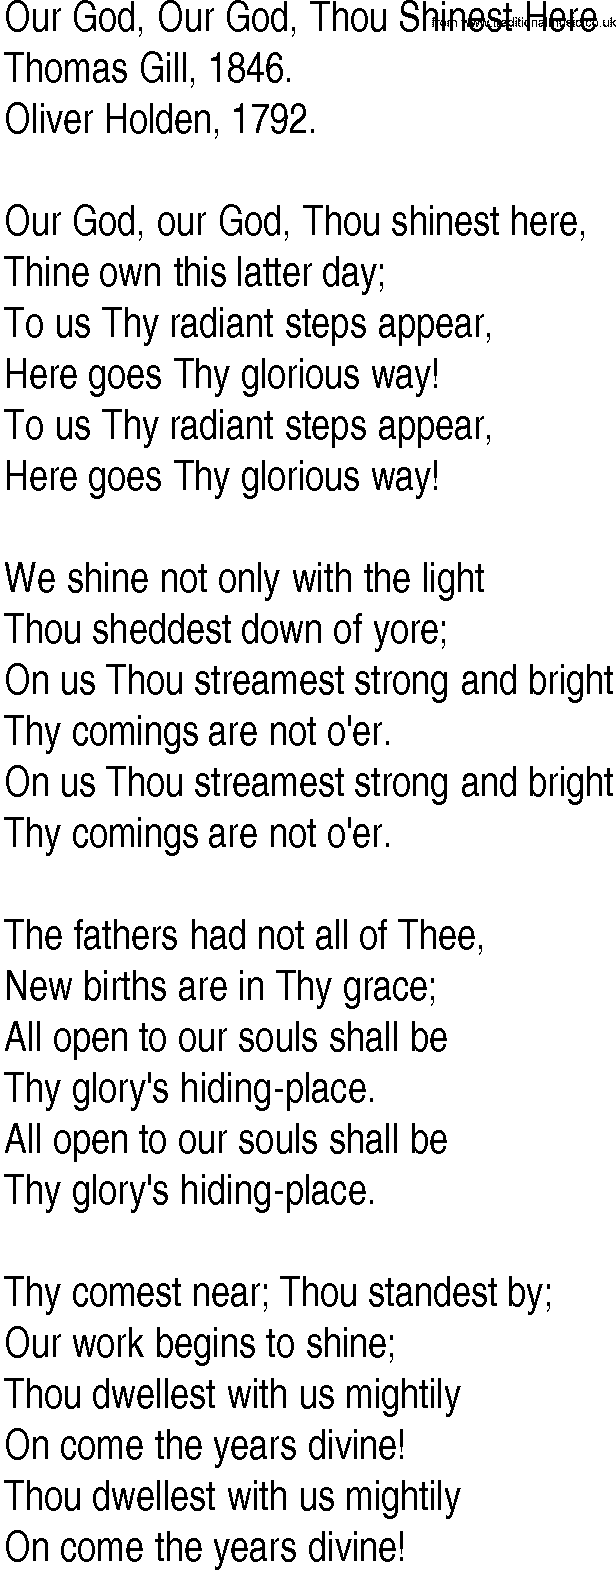 Hymn and Gospel Song: Our God, Our God, Thou Shinest Here by Thomas Gill lyrics